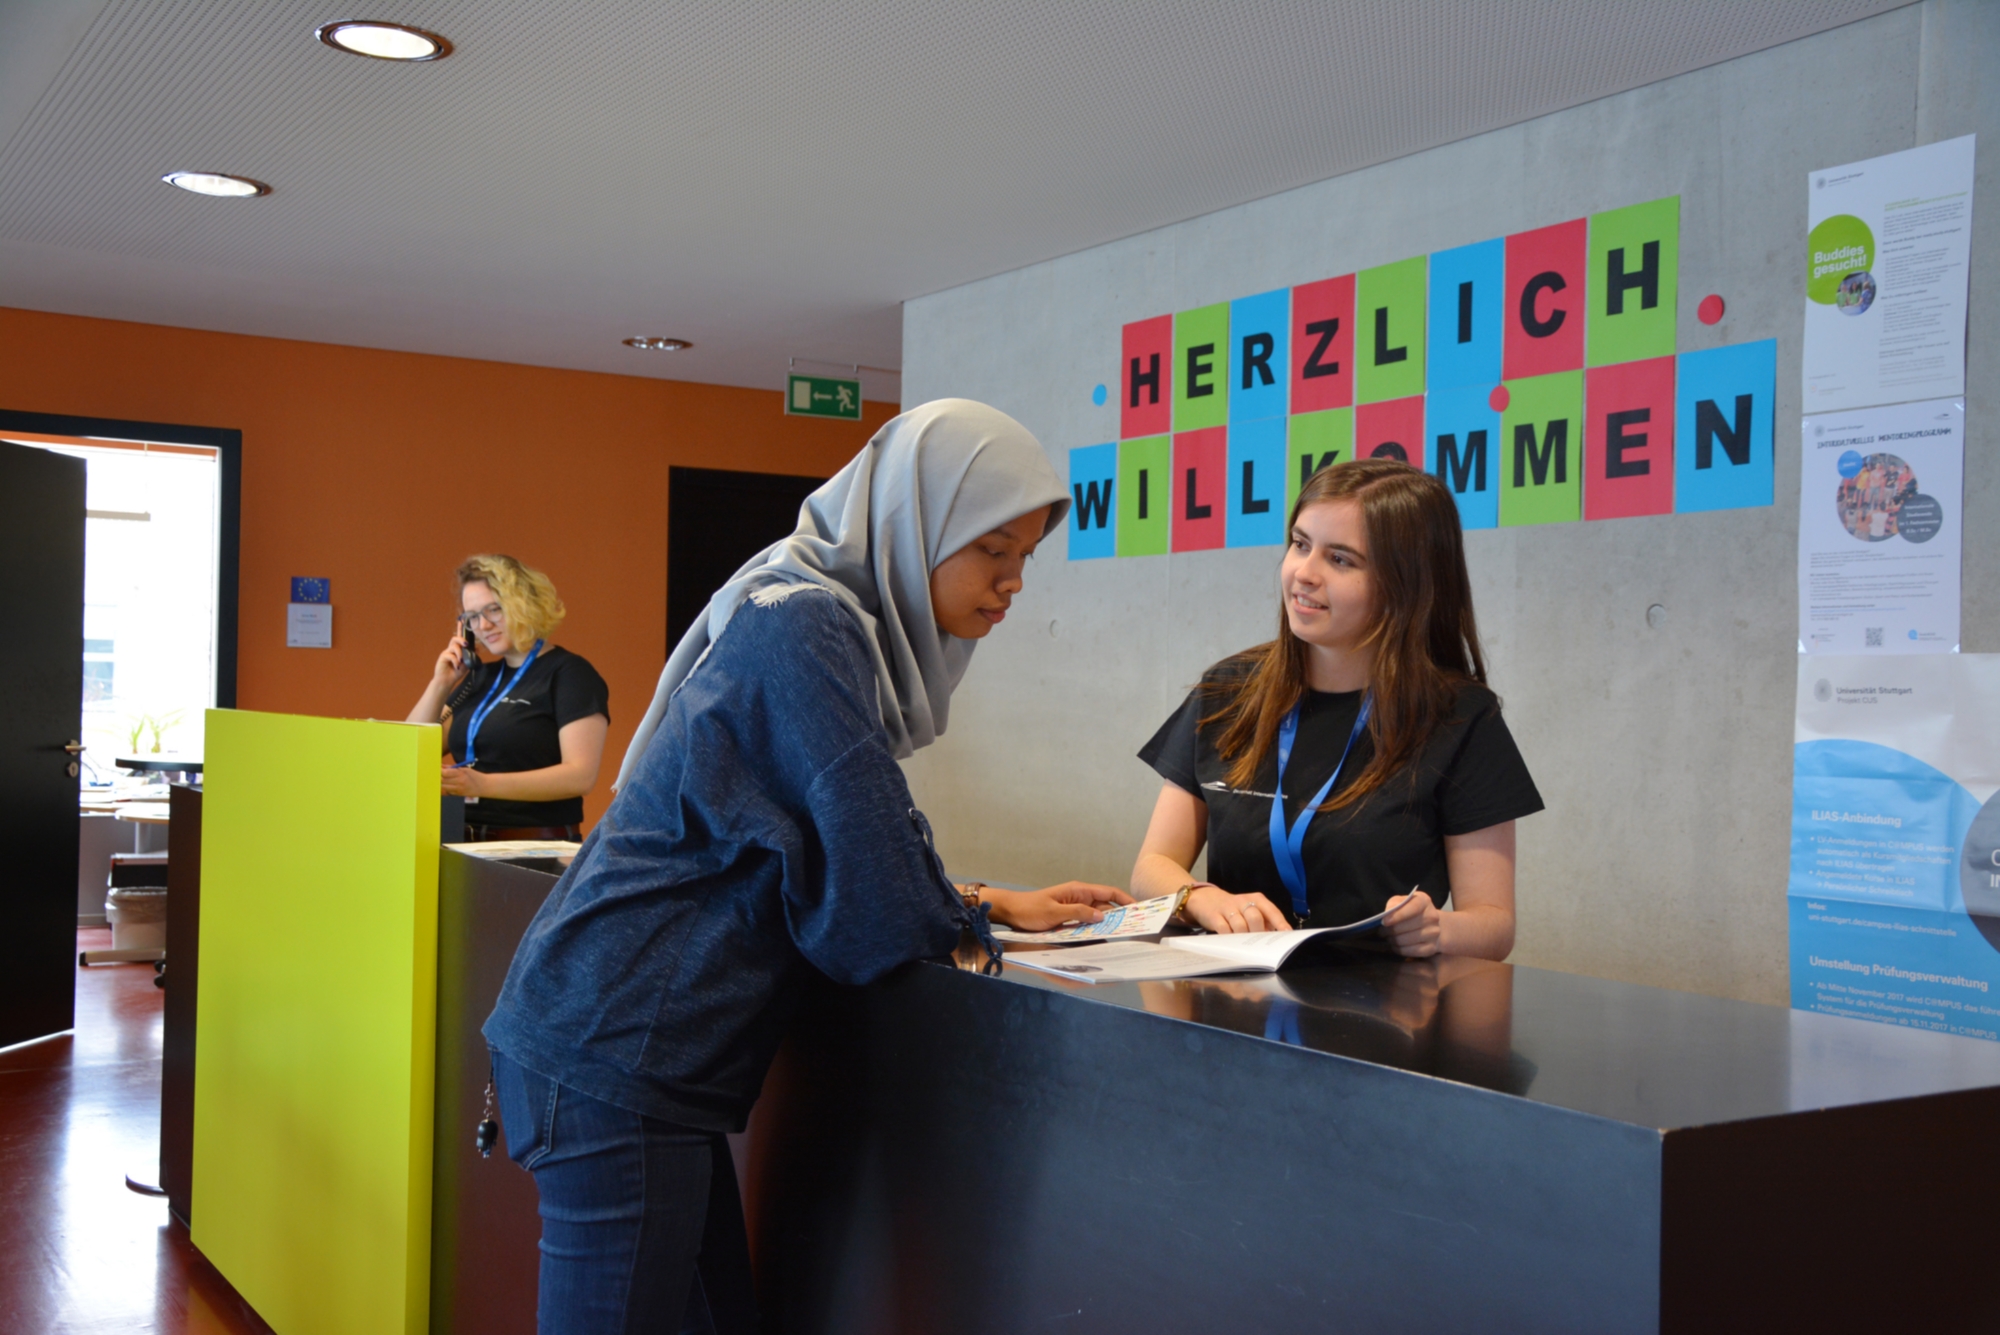 A foreign student is adviced by another student in the International Office of the University of Stuttgart.